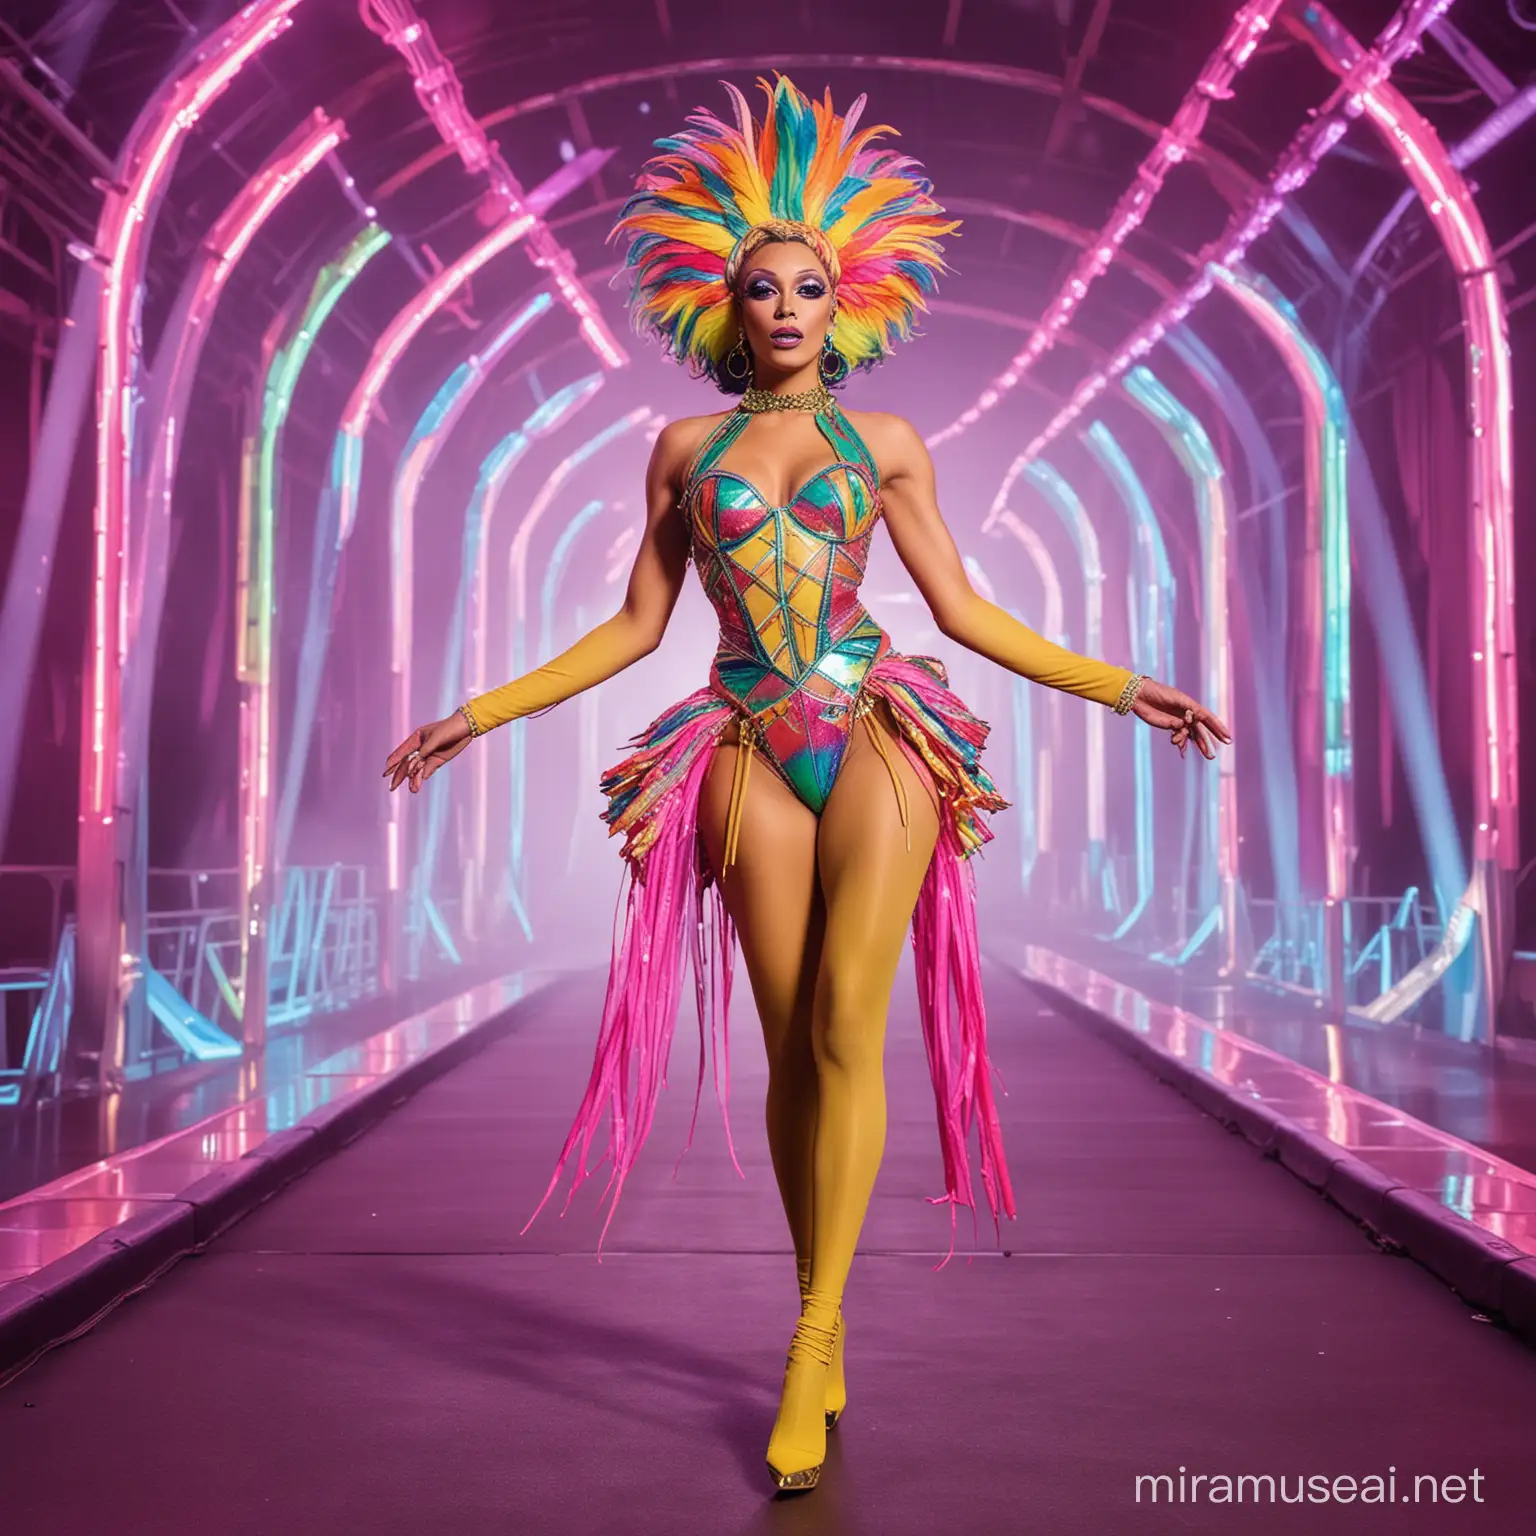 a full body image of a skinny brazilian neon drag queen walking on the Rupaul's Drag race runway wearing an outfit inspired by the prompt: technicolour 